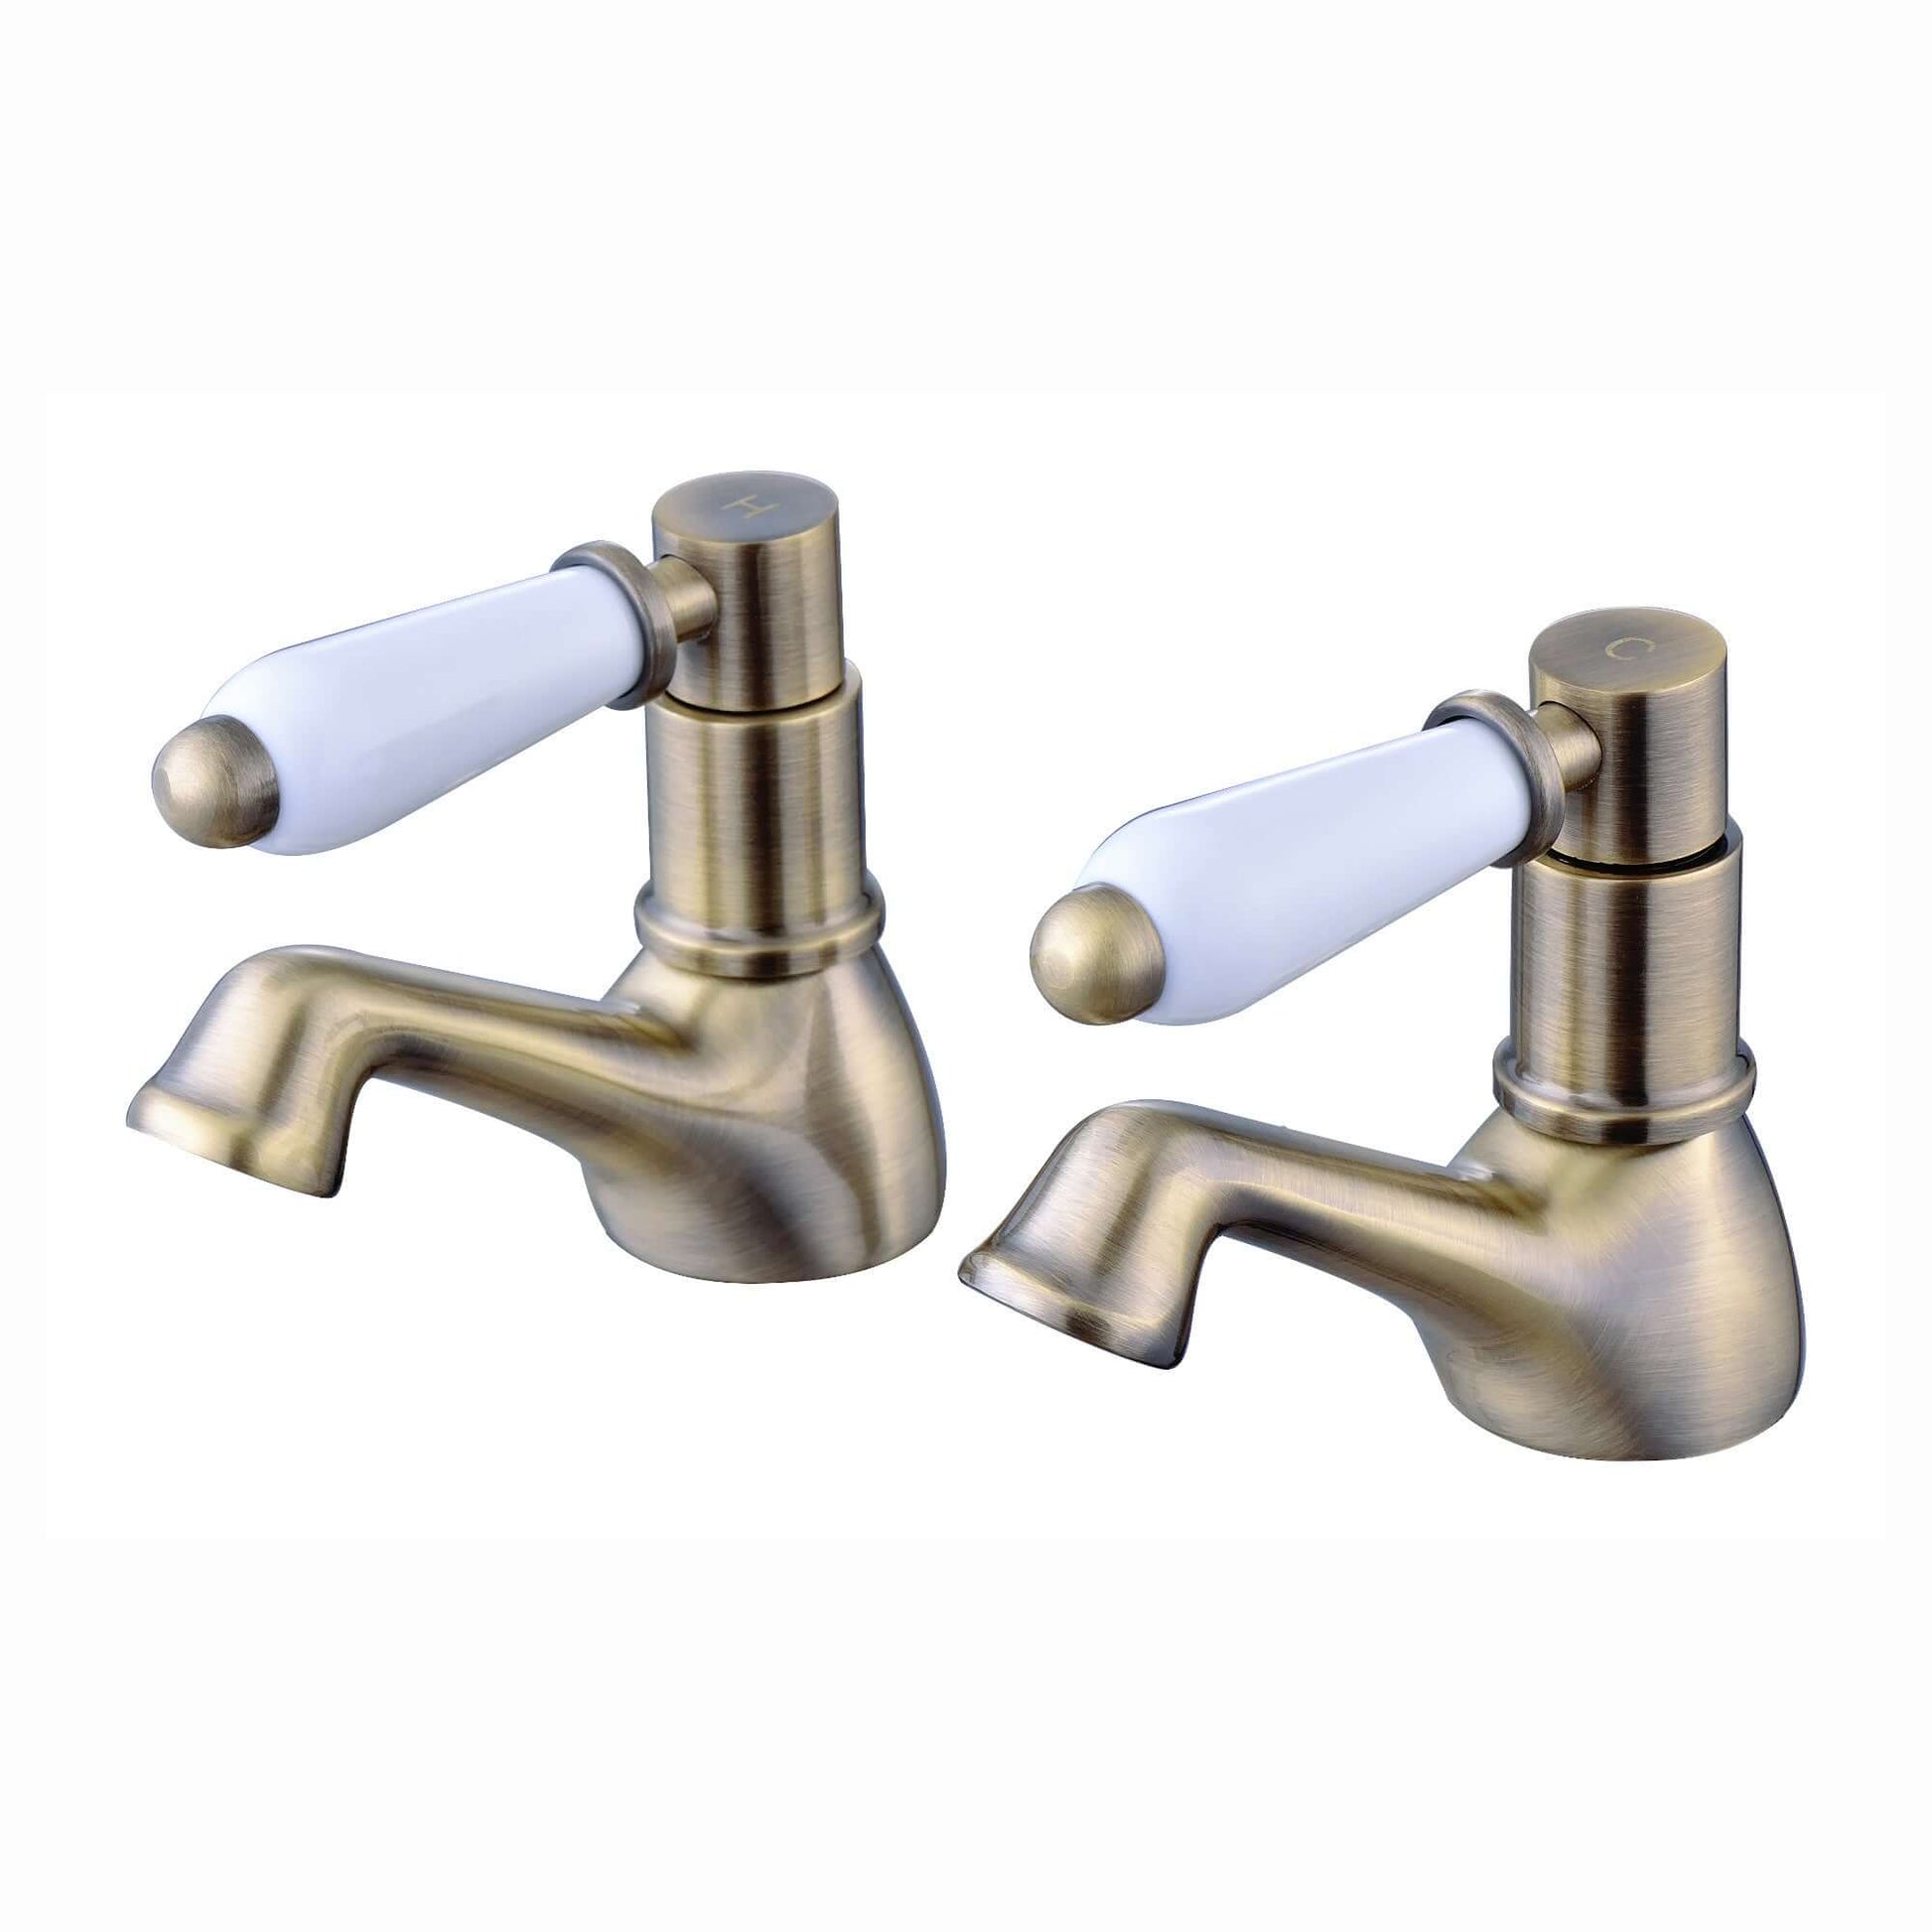 Downton hot and cold basin taps with white ceramic levers - antique bronze - Taps